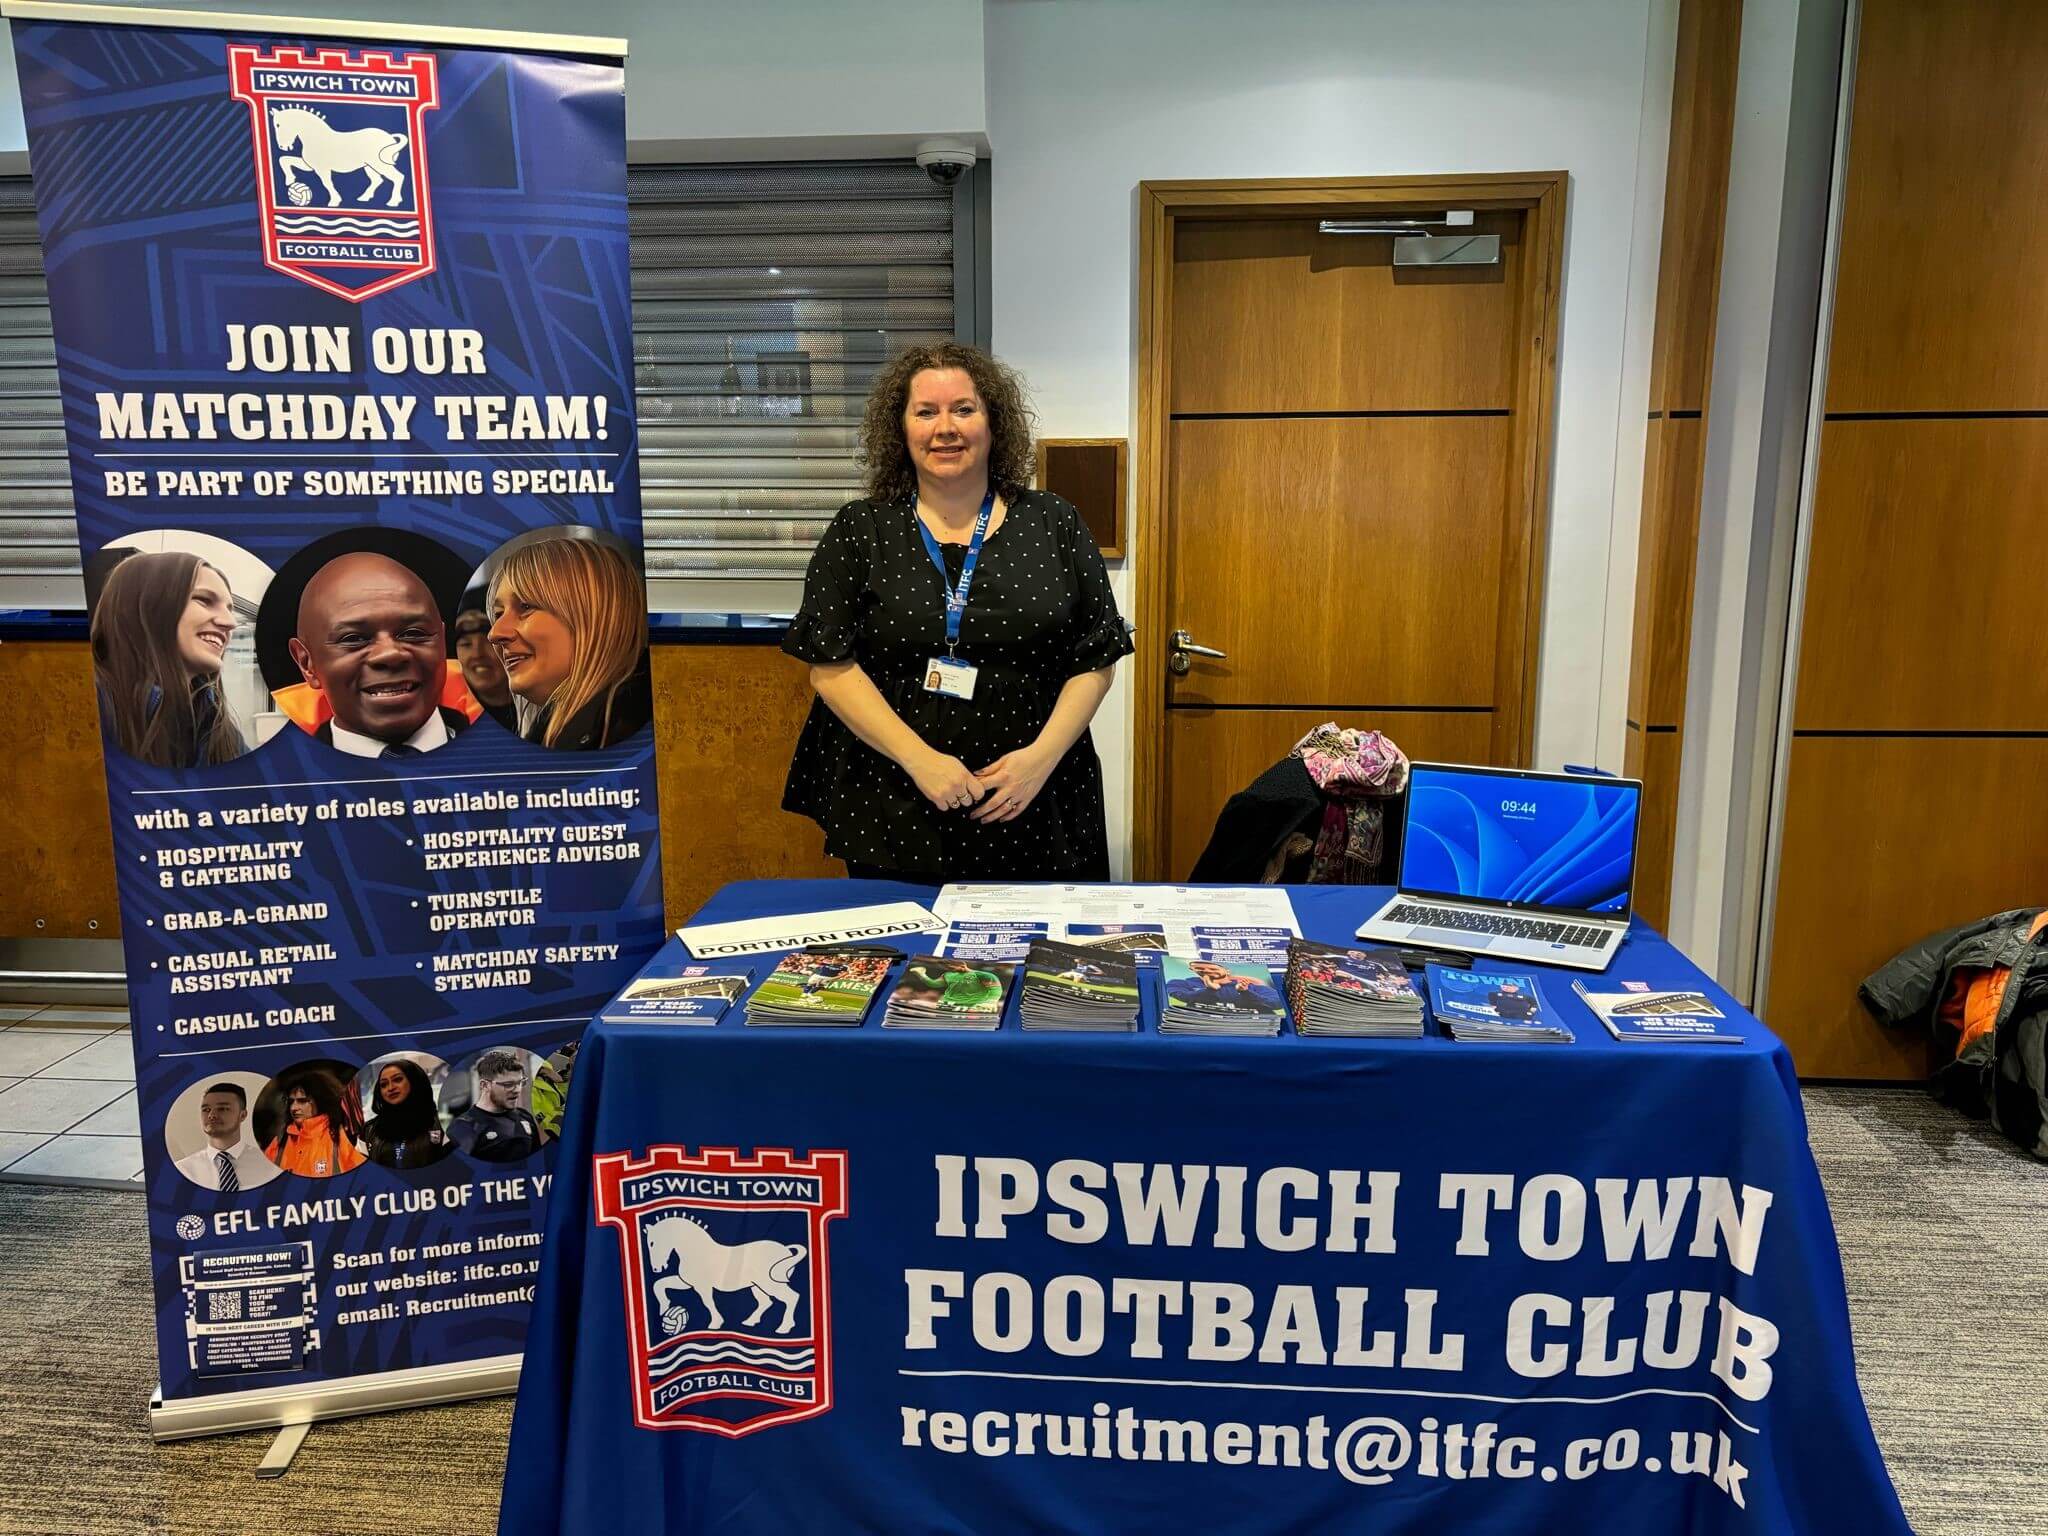 Ipswich Town Football Club at our event in Ipswich